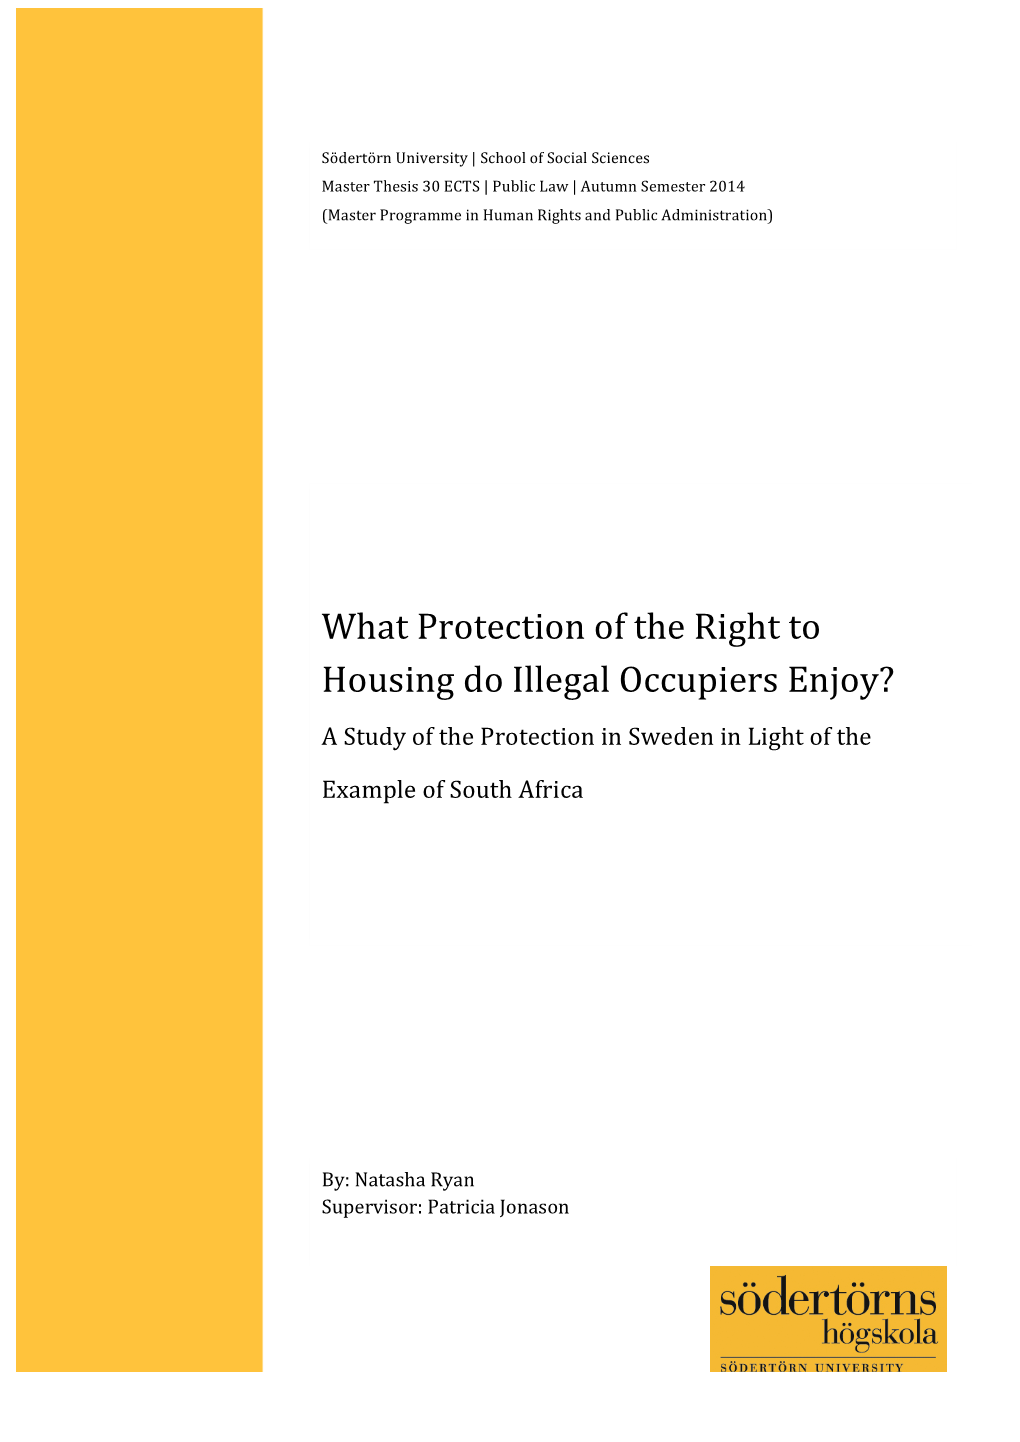 What Protection of the Right to Housing Do Illegal Occupiers Enjoy?